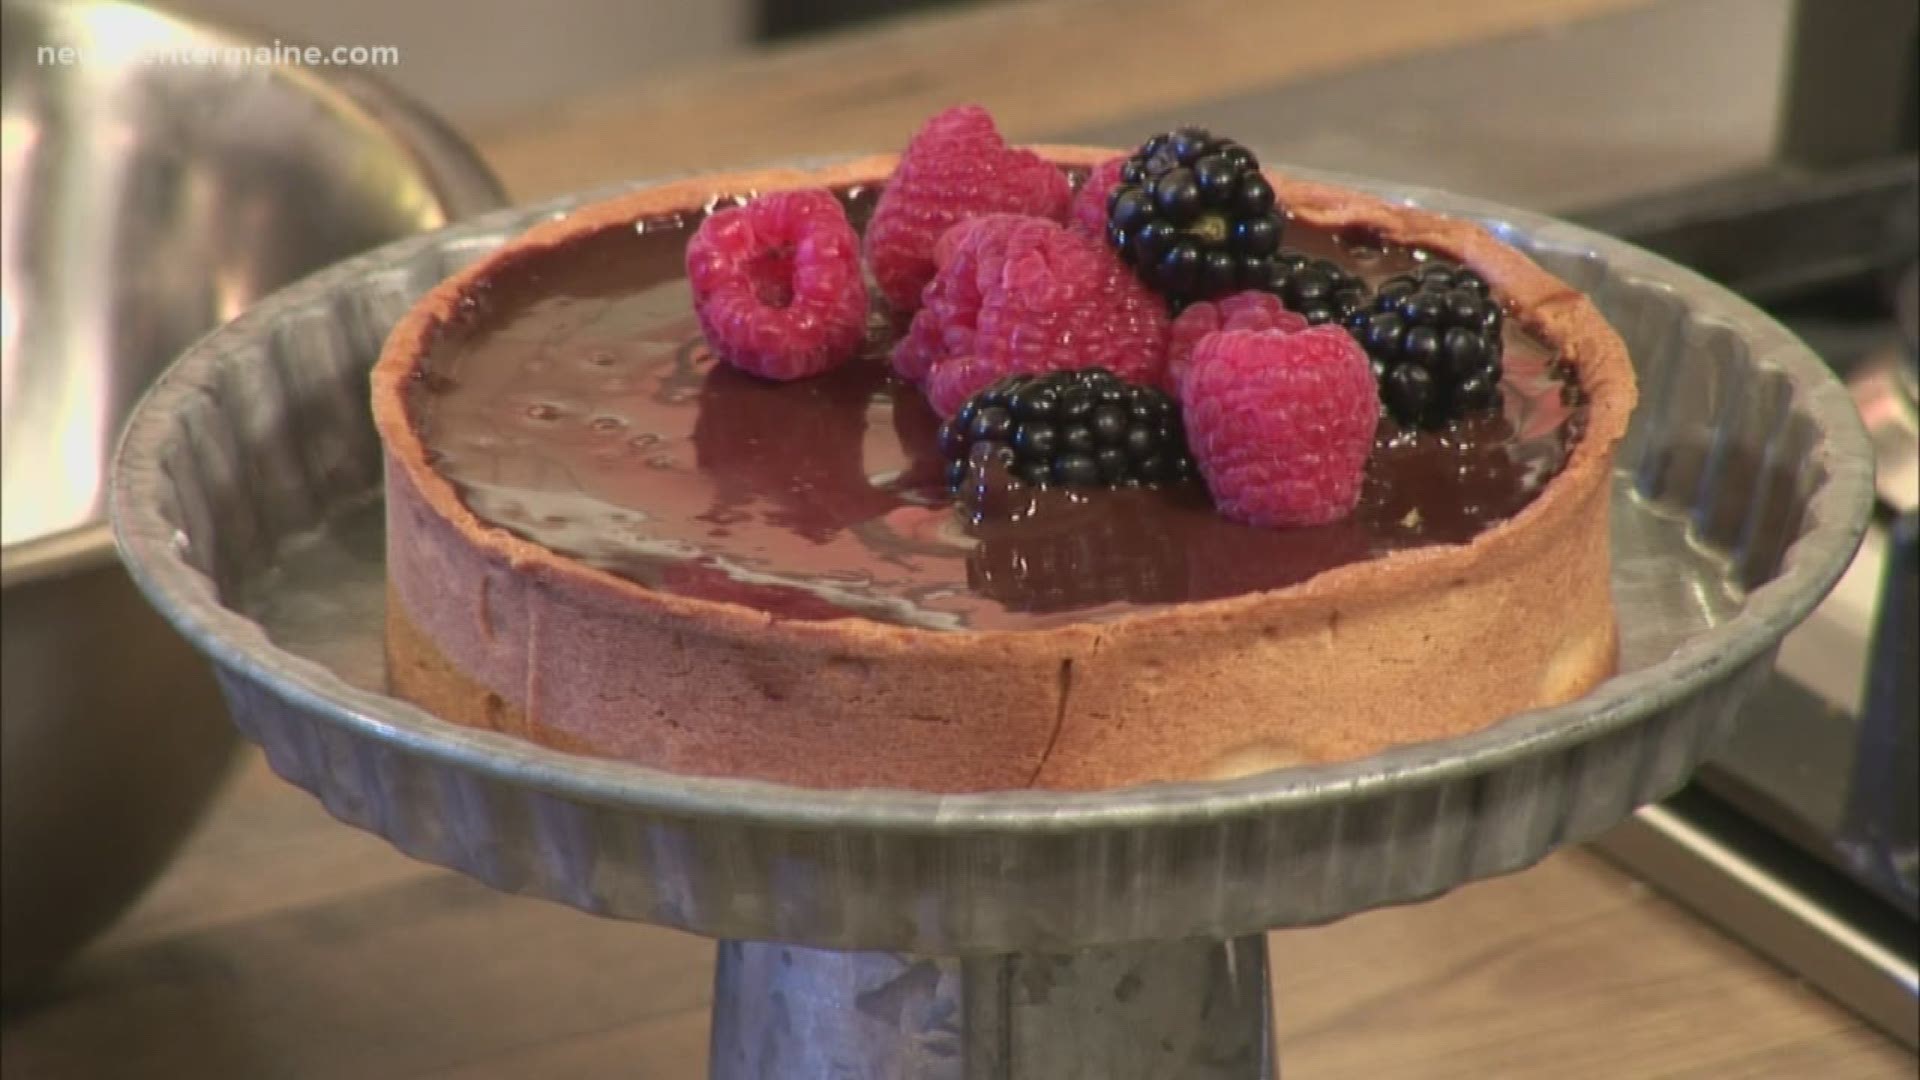 Chef Kristen Lawson Perry has Valentine's Day in mind with this chocolate dessert!